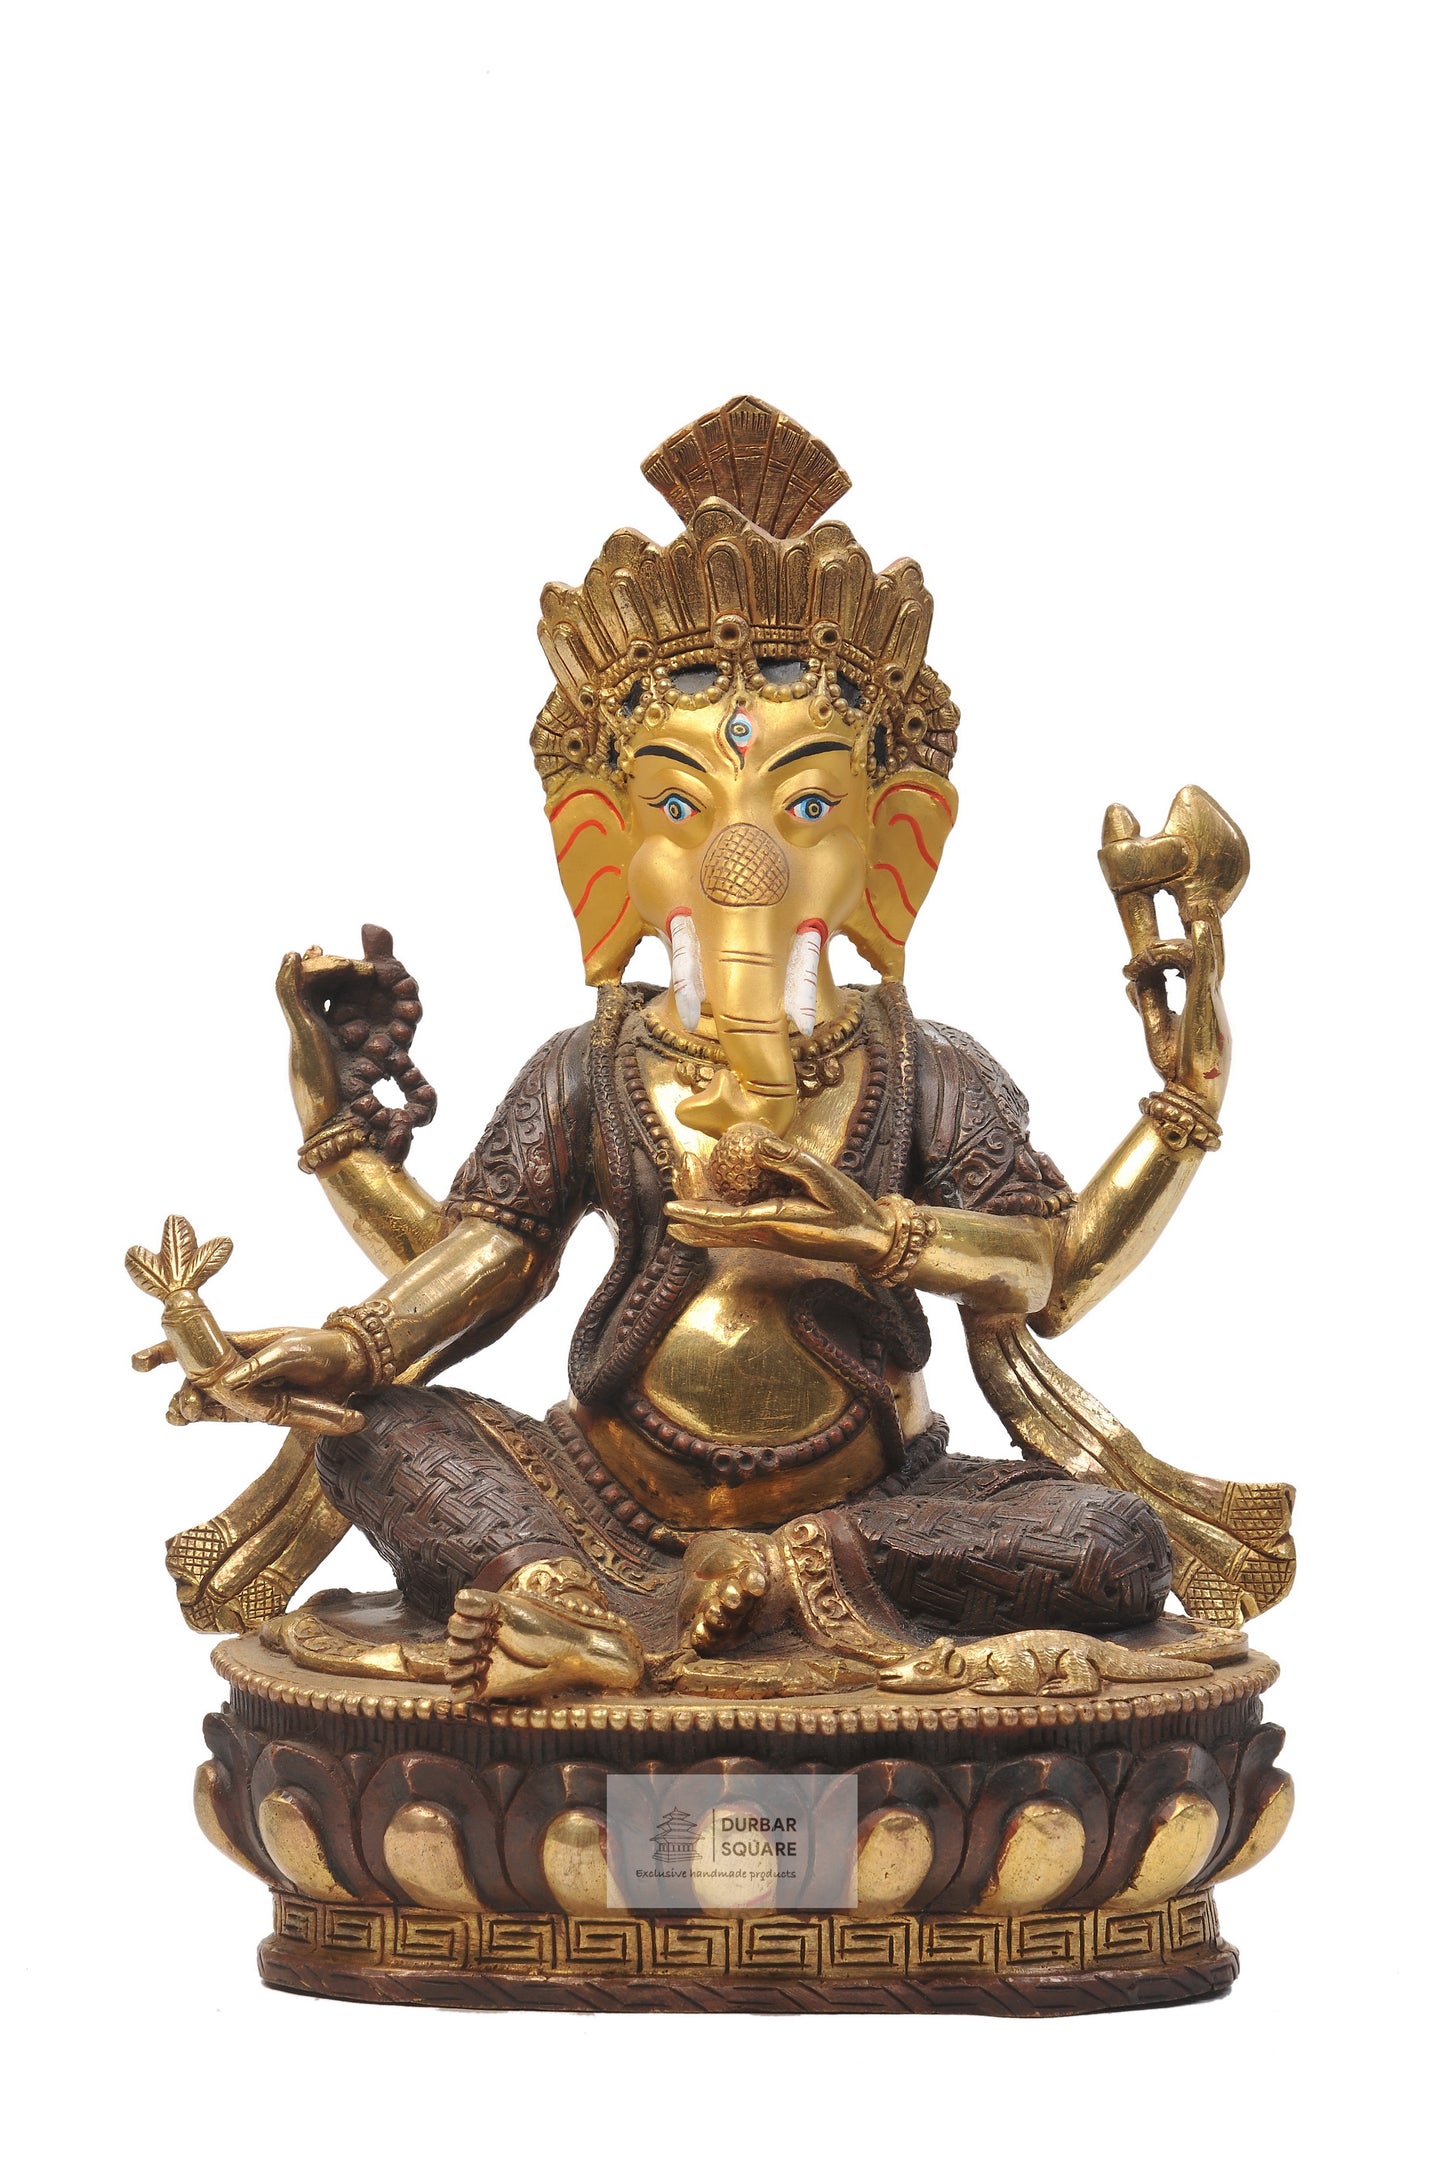 Ganesh Statue with Gold Dusted Face